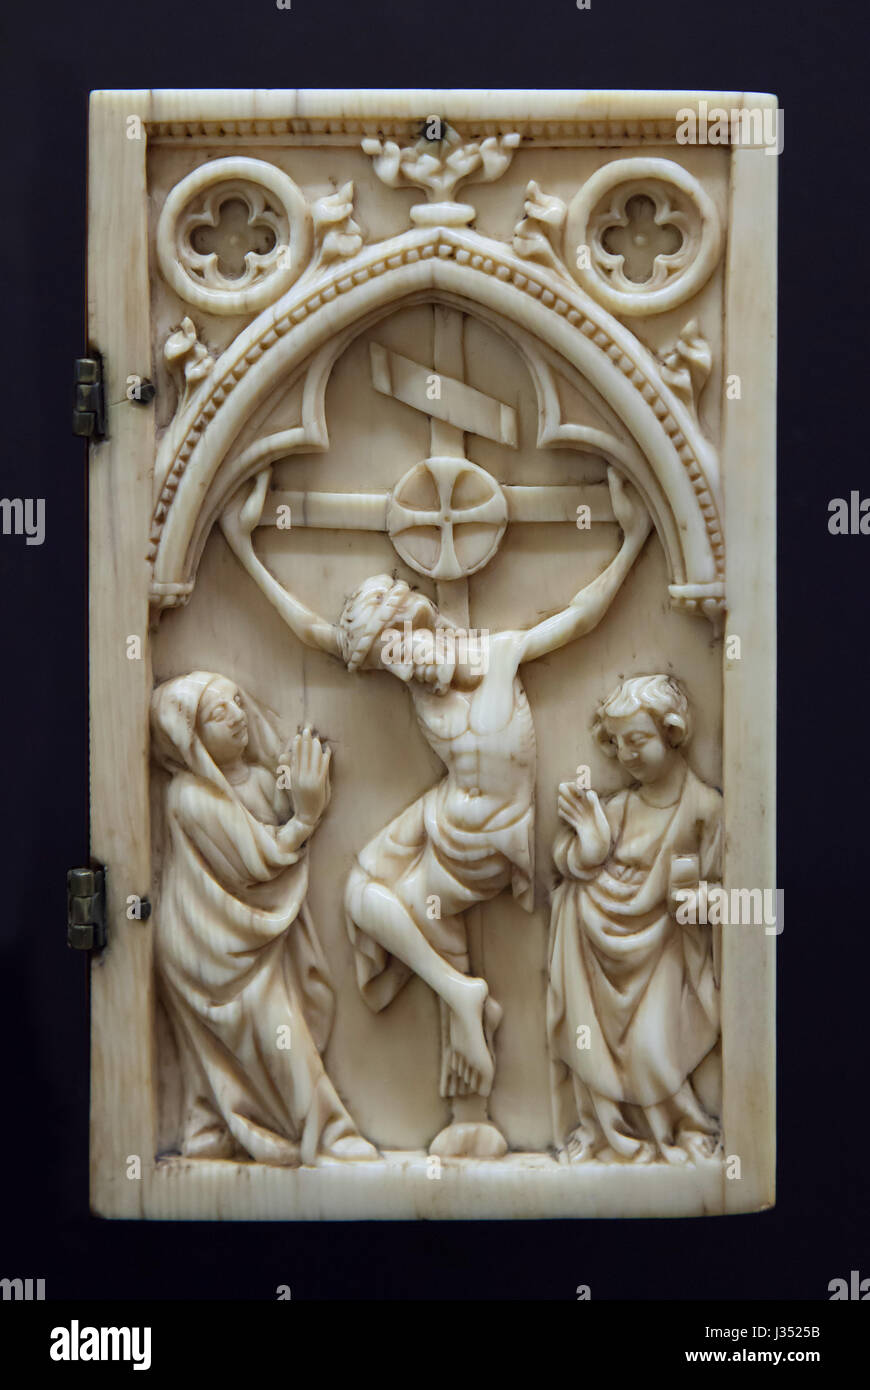 Crucifixion. Detail of the ivory diptych dated from ca. 1330 on display in the Musee des Beaux-Arts de Dijon (Museum of Fine Arts) in Dijon, Burgundy, France. Stock Photo